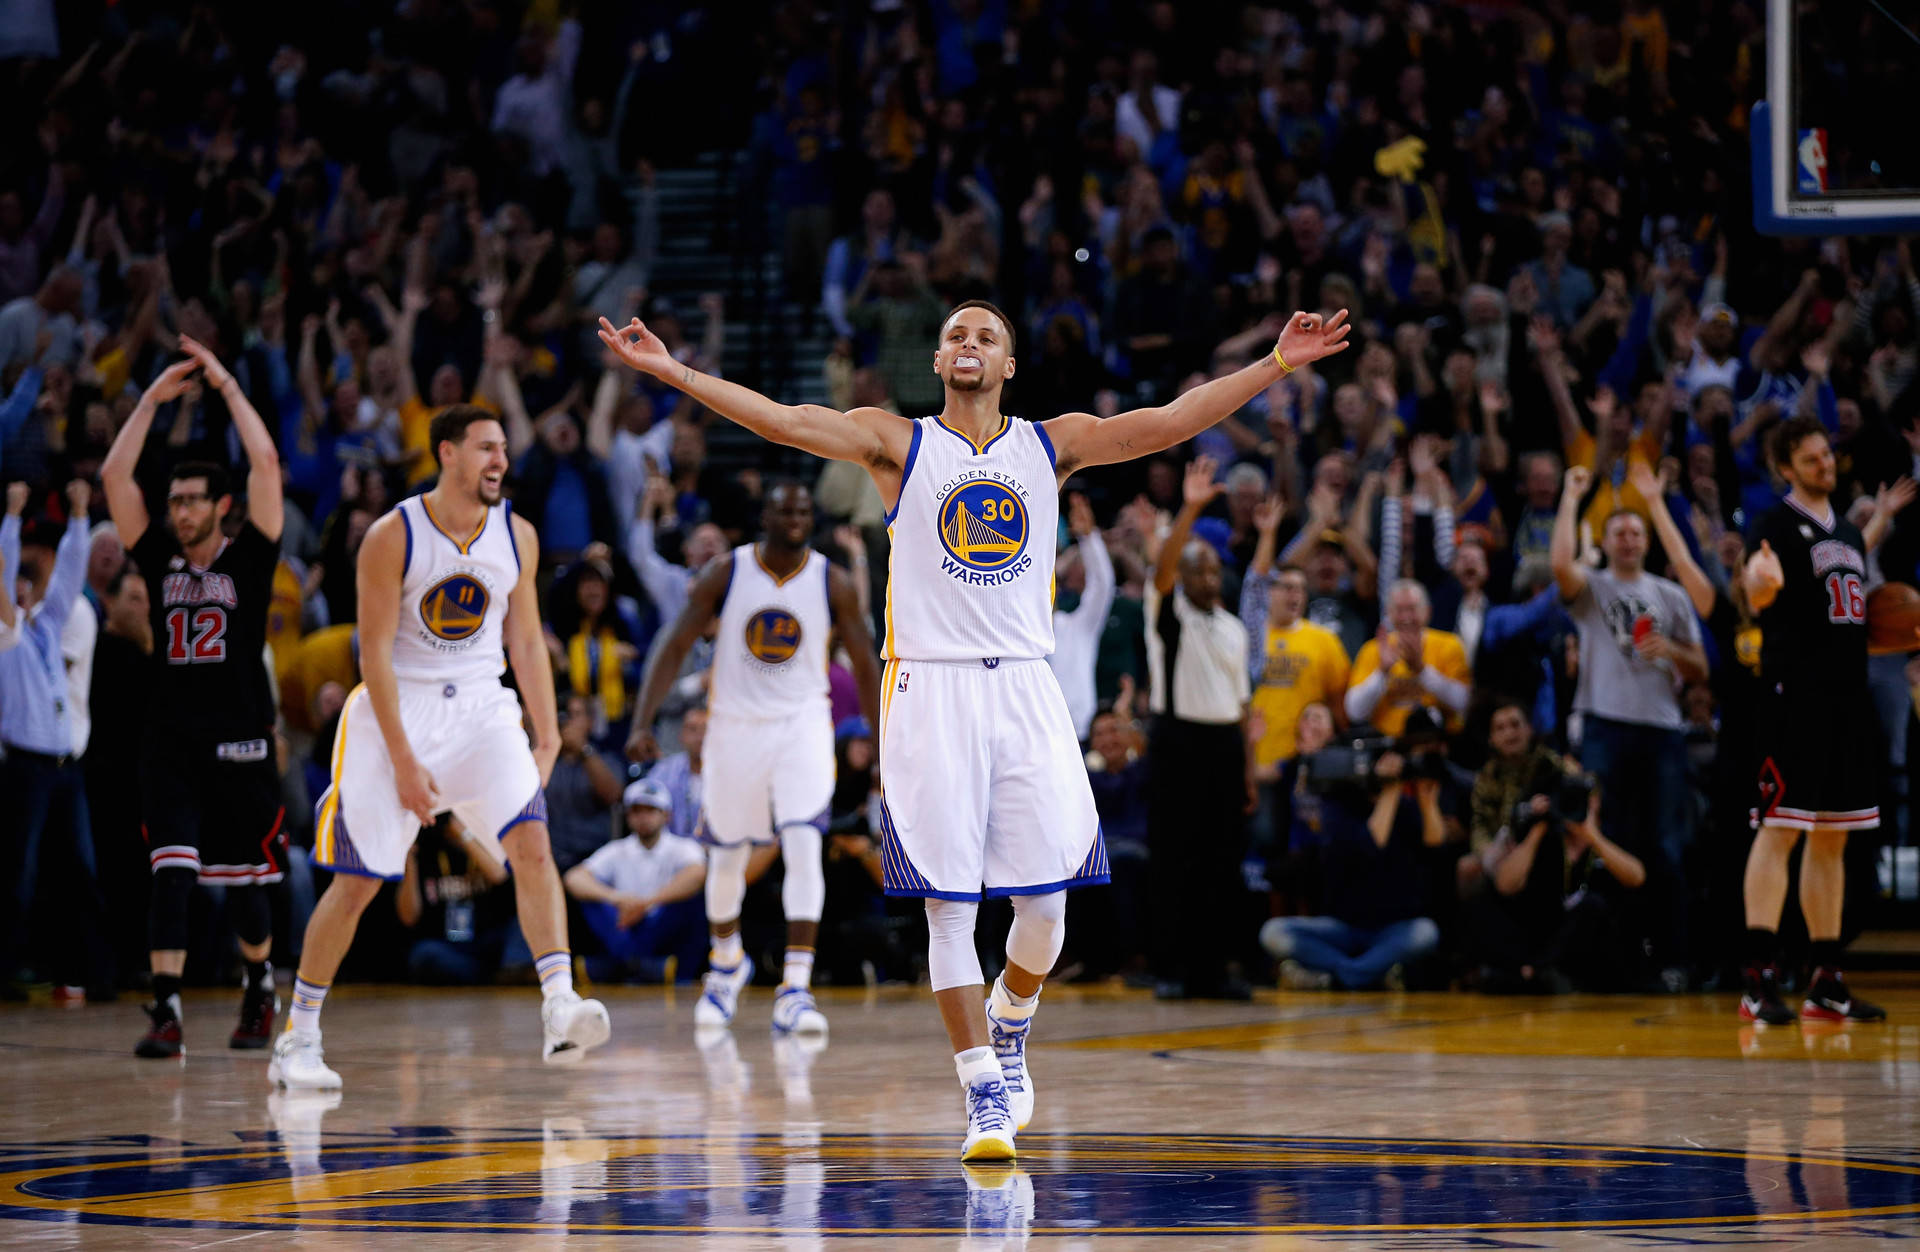 Stephen Curry and the Golden State Warriors celebrate after a victory against the Chicago Bulls at ORACLE Arena on November 20, 2015. (Ezra Shaw/Getty Images)